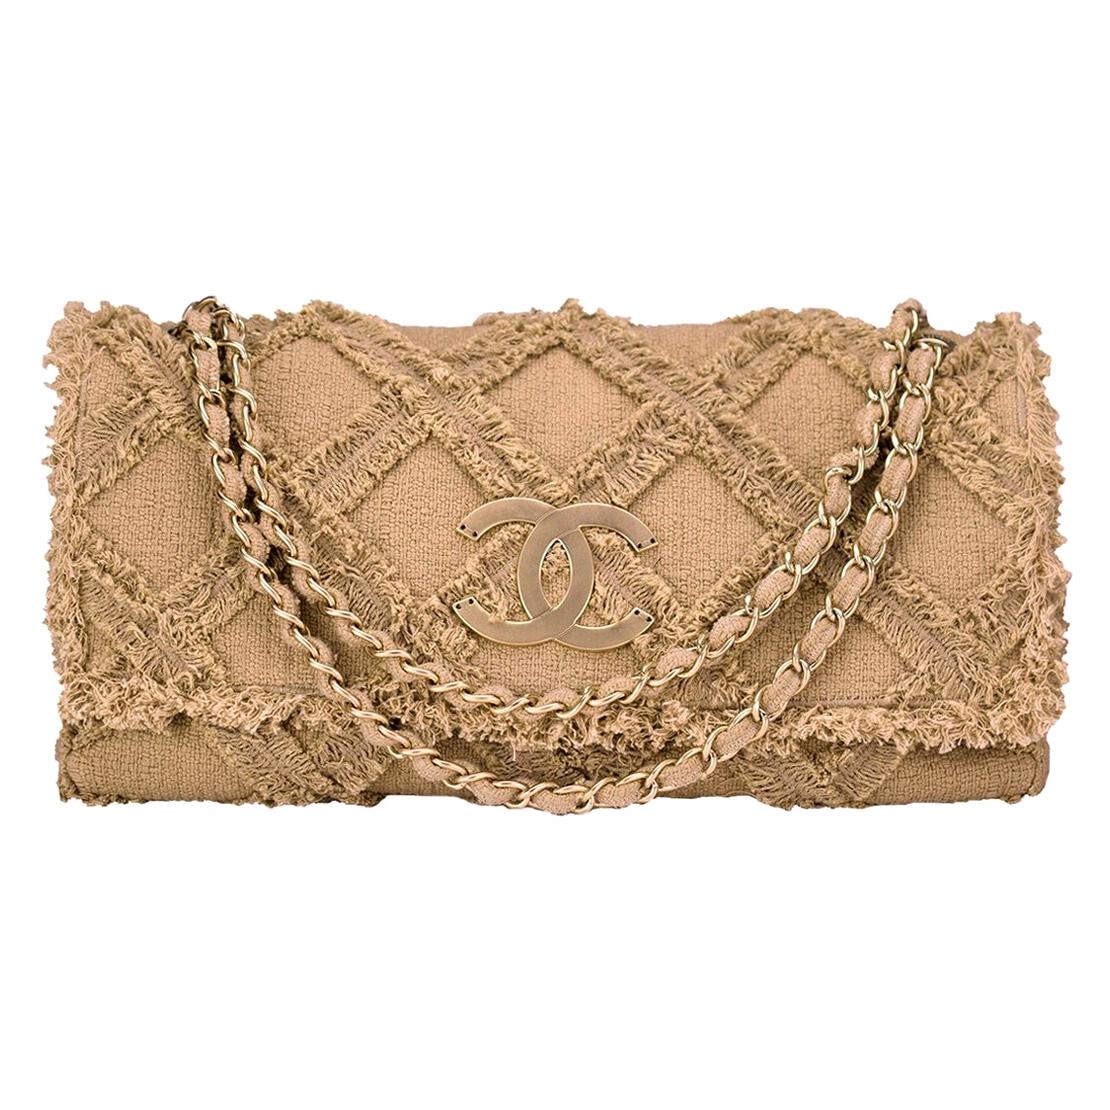 Chanel Limited Edition Crochet Nature Tweed Extra Large Flap Bag